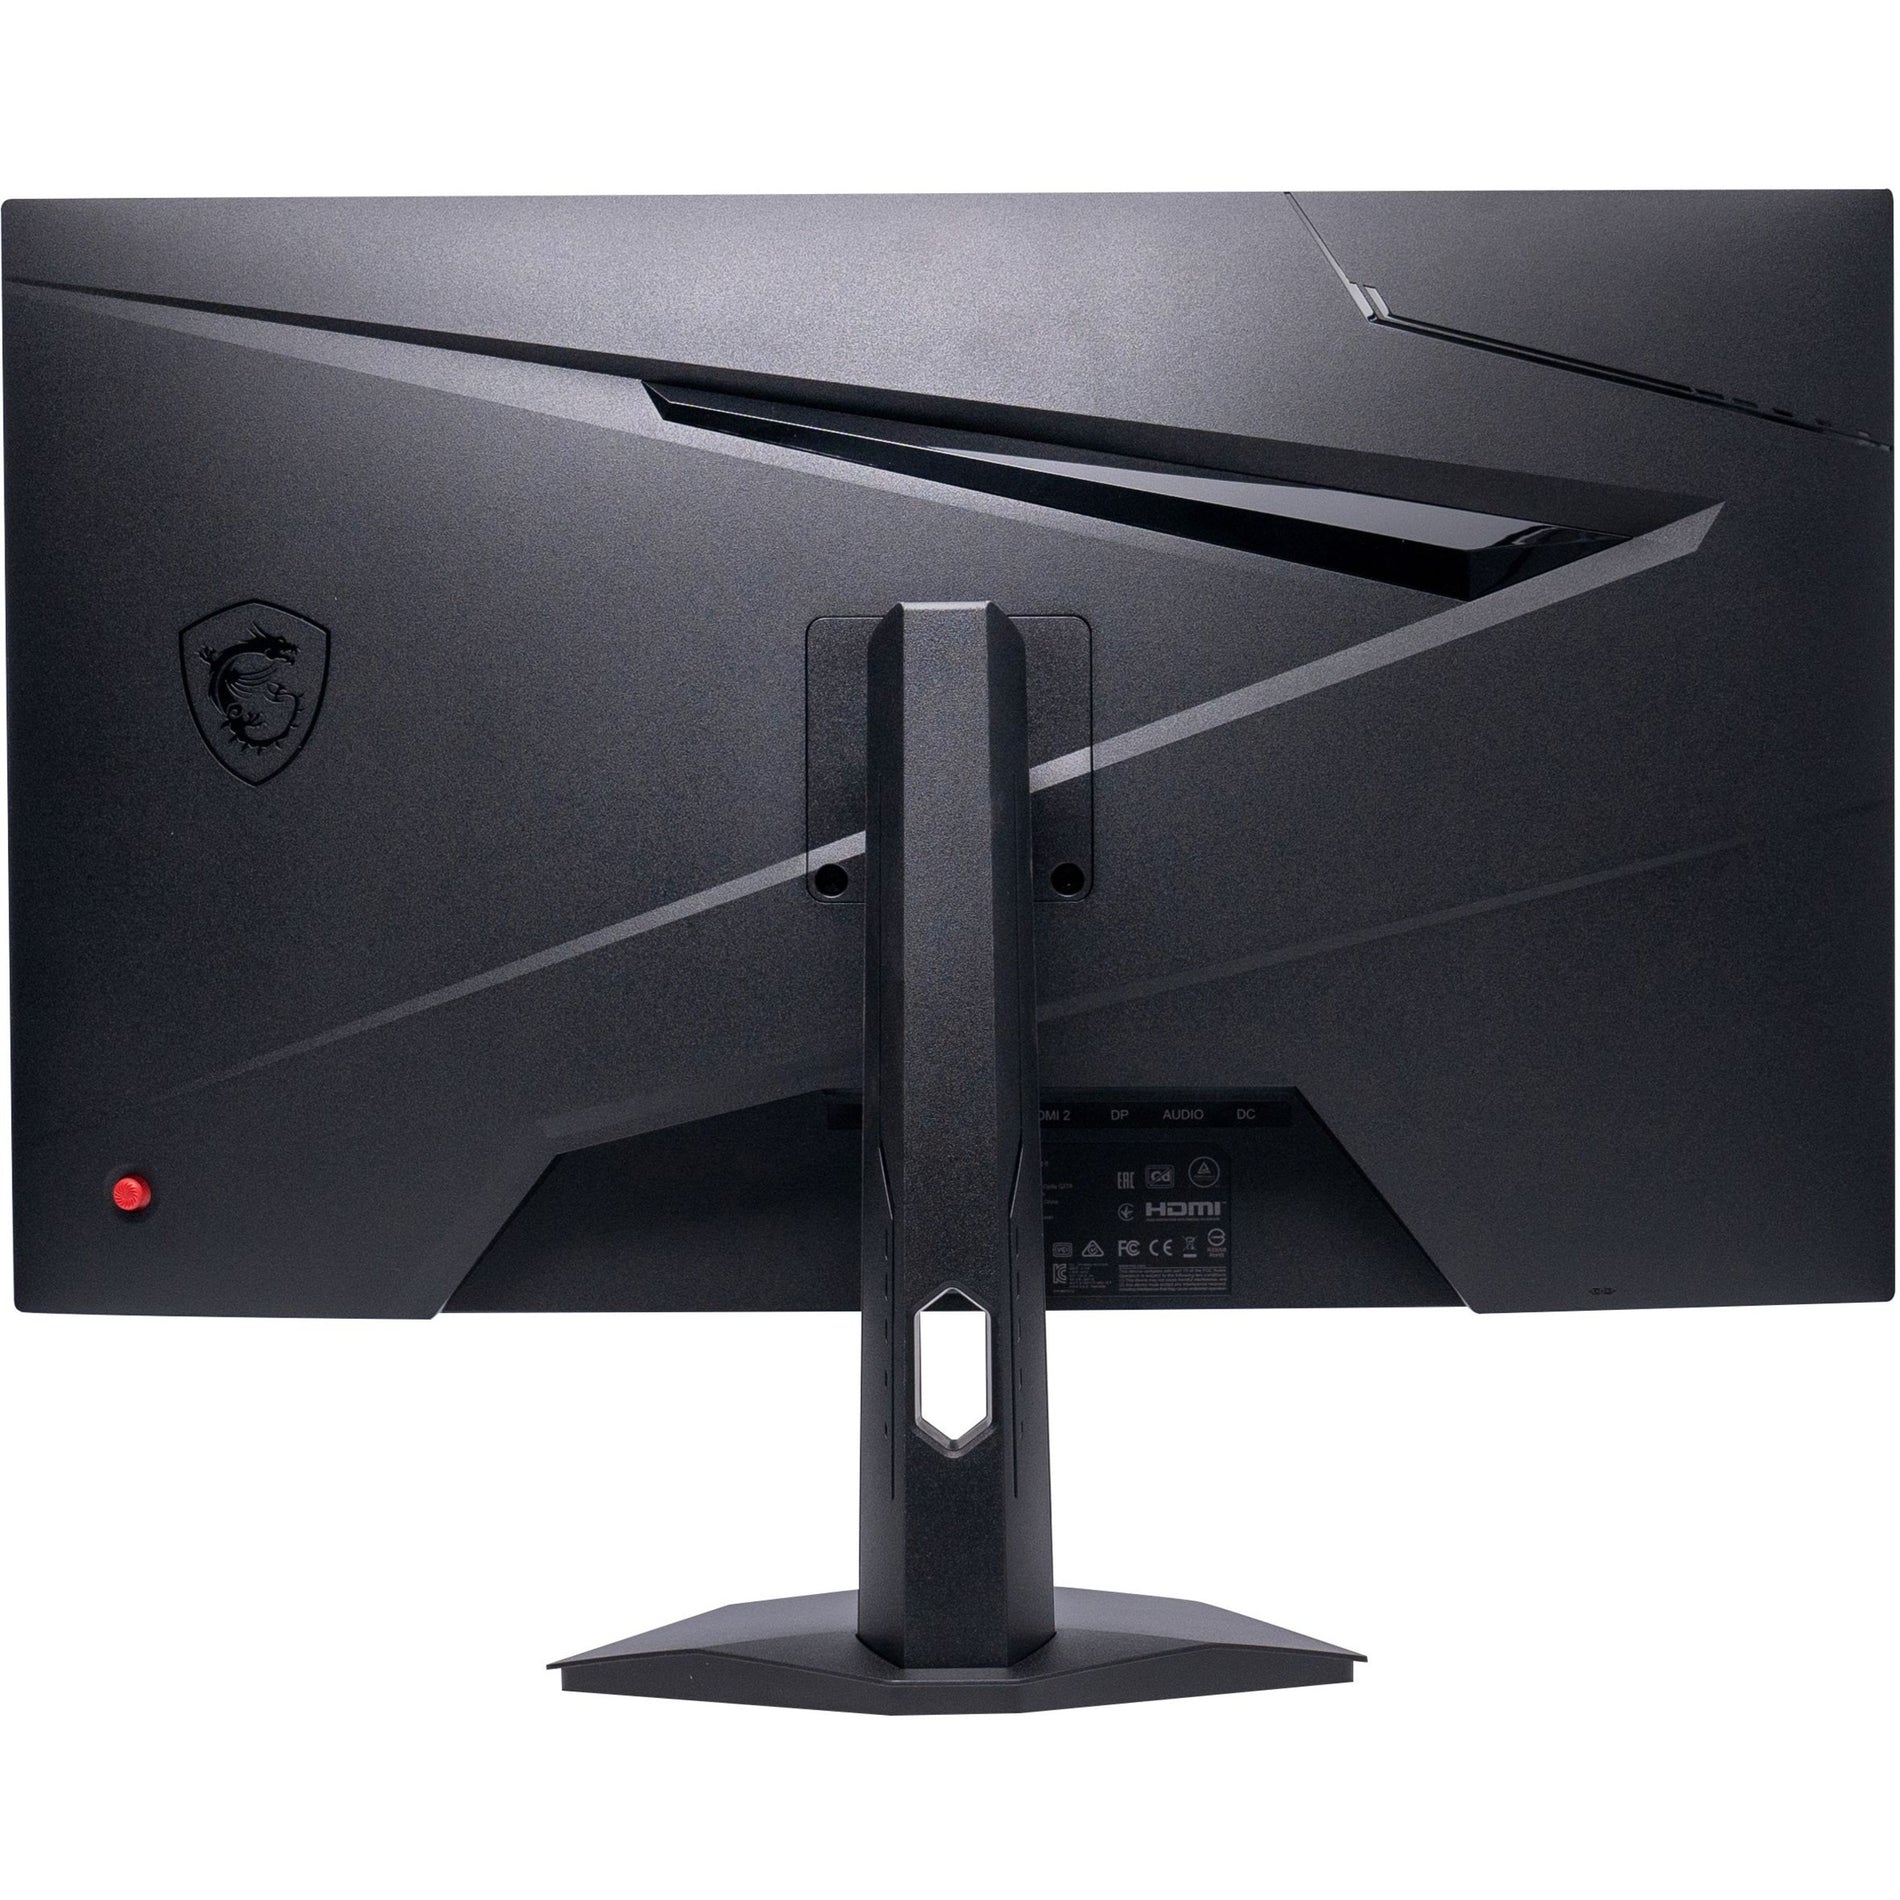 MSI OPTIXG274 Optix G274 27" Full HD Gaming LCD Monitor, 1ms Response Time, G-Sync Compatible, Wide Color Gamut